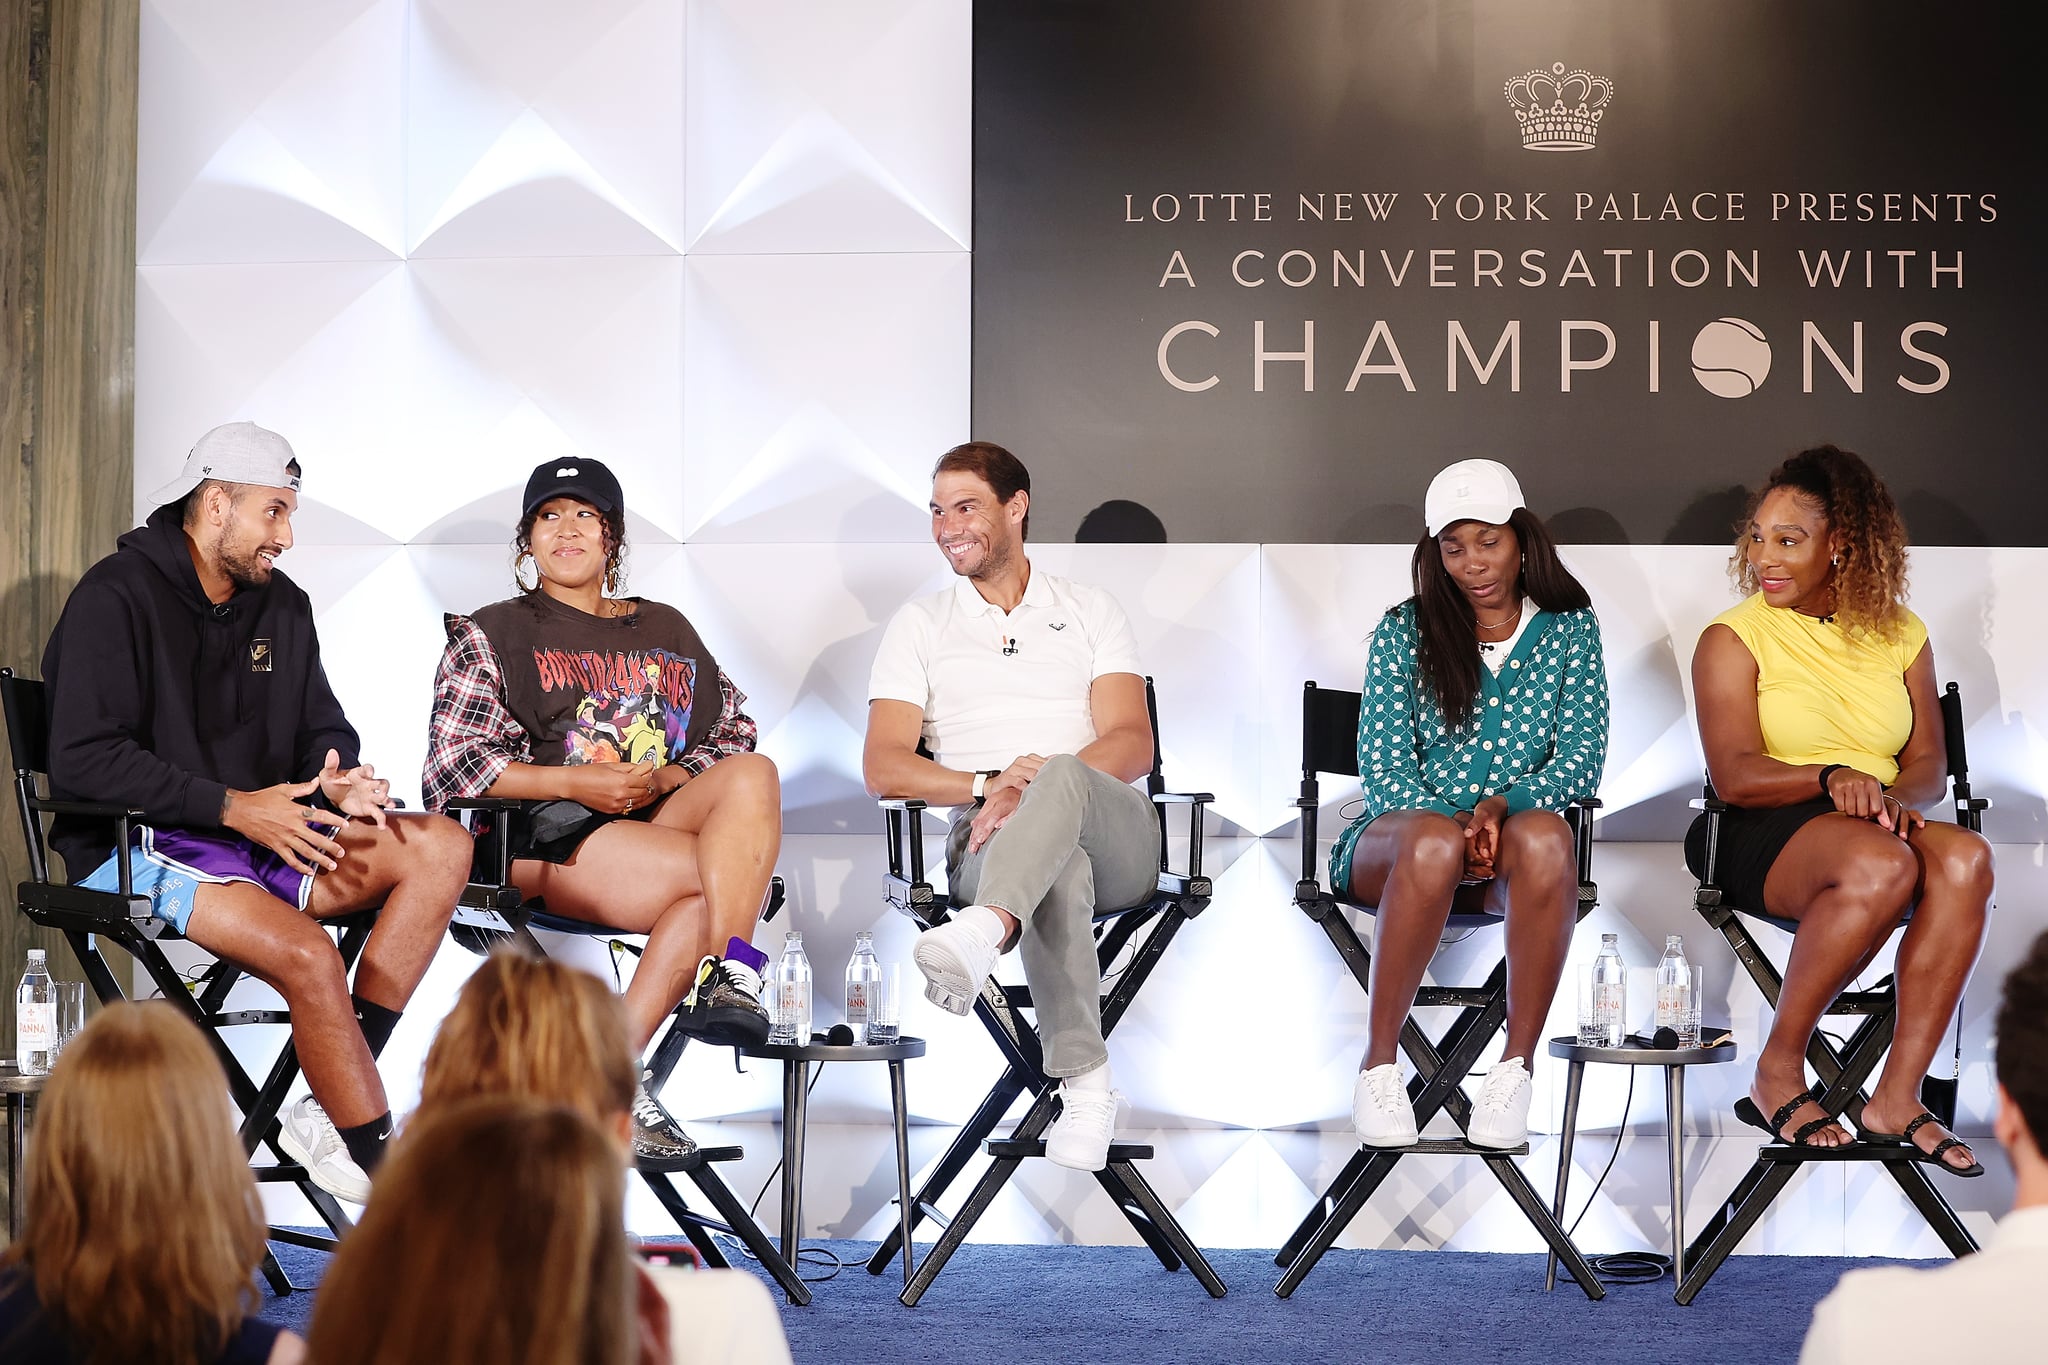 NEW YORK, NEW YORK - AUGUST 25: (L-R) Nick Kyrgios, Naomi Osaka, Rafael Nadal, Venus Williams and Serena Williams attend A Conversation With Champions presented by Lotte New York Palace at Lotte New York Palace on August 25, 2022 in New York City. (Photo by Monica Schipper/Getty Images for Lotte New York Palace )